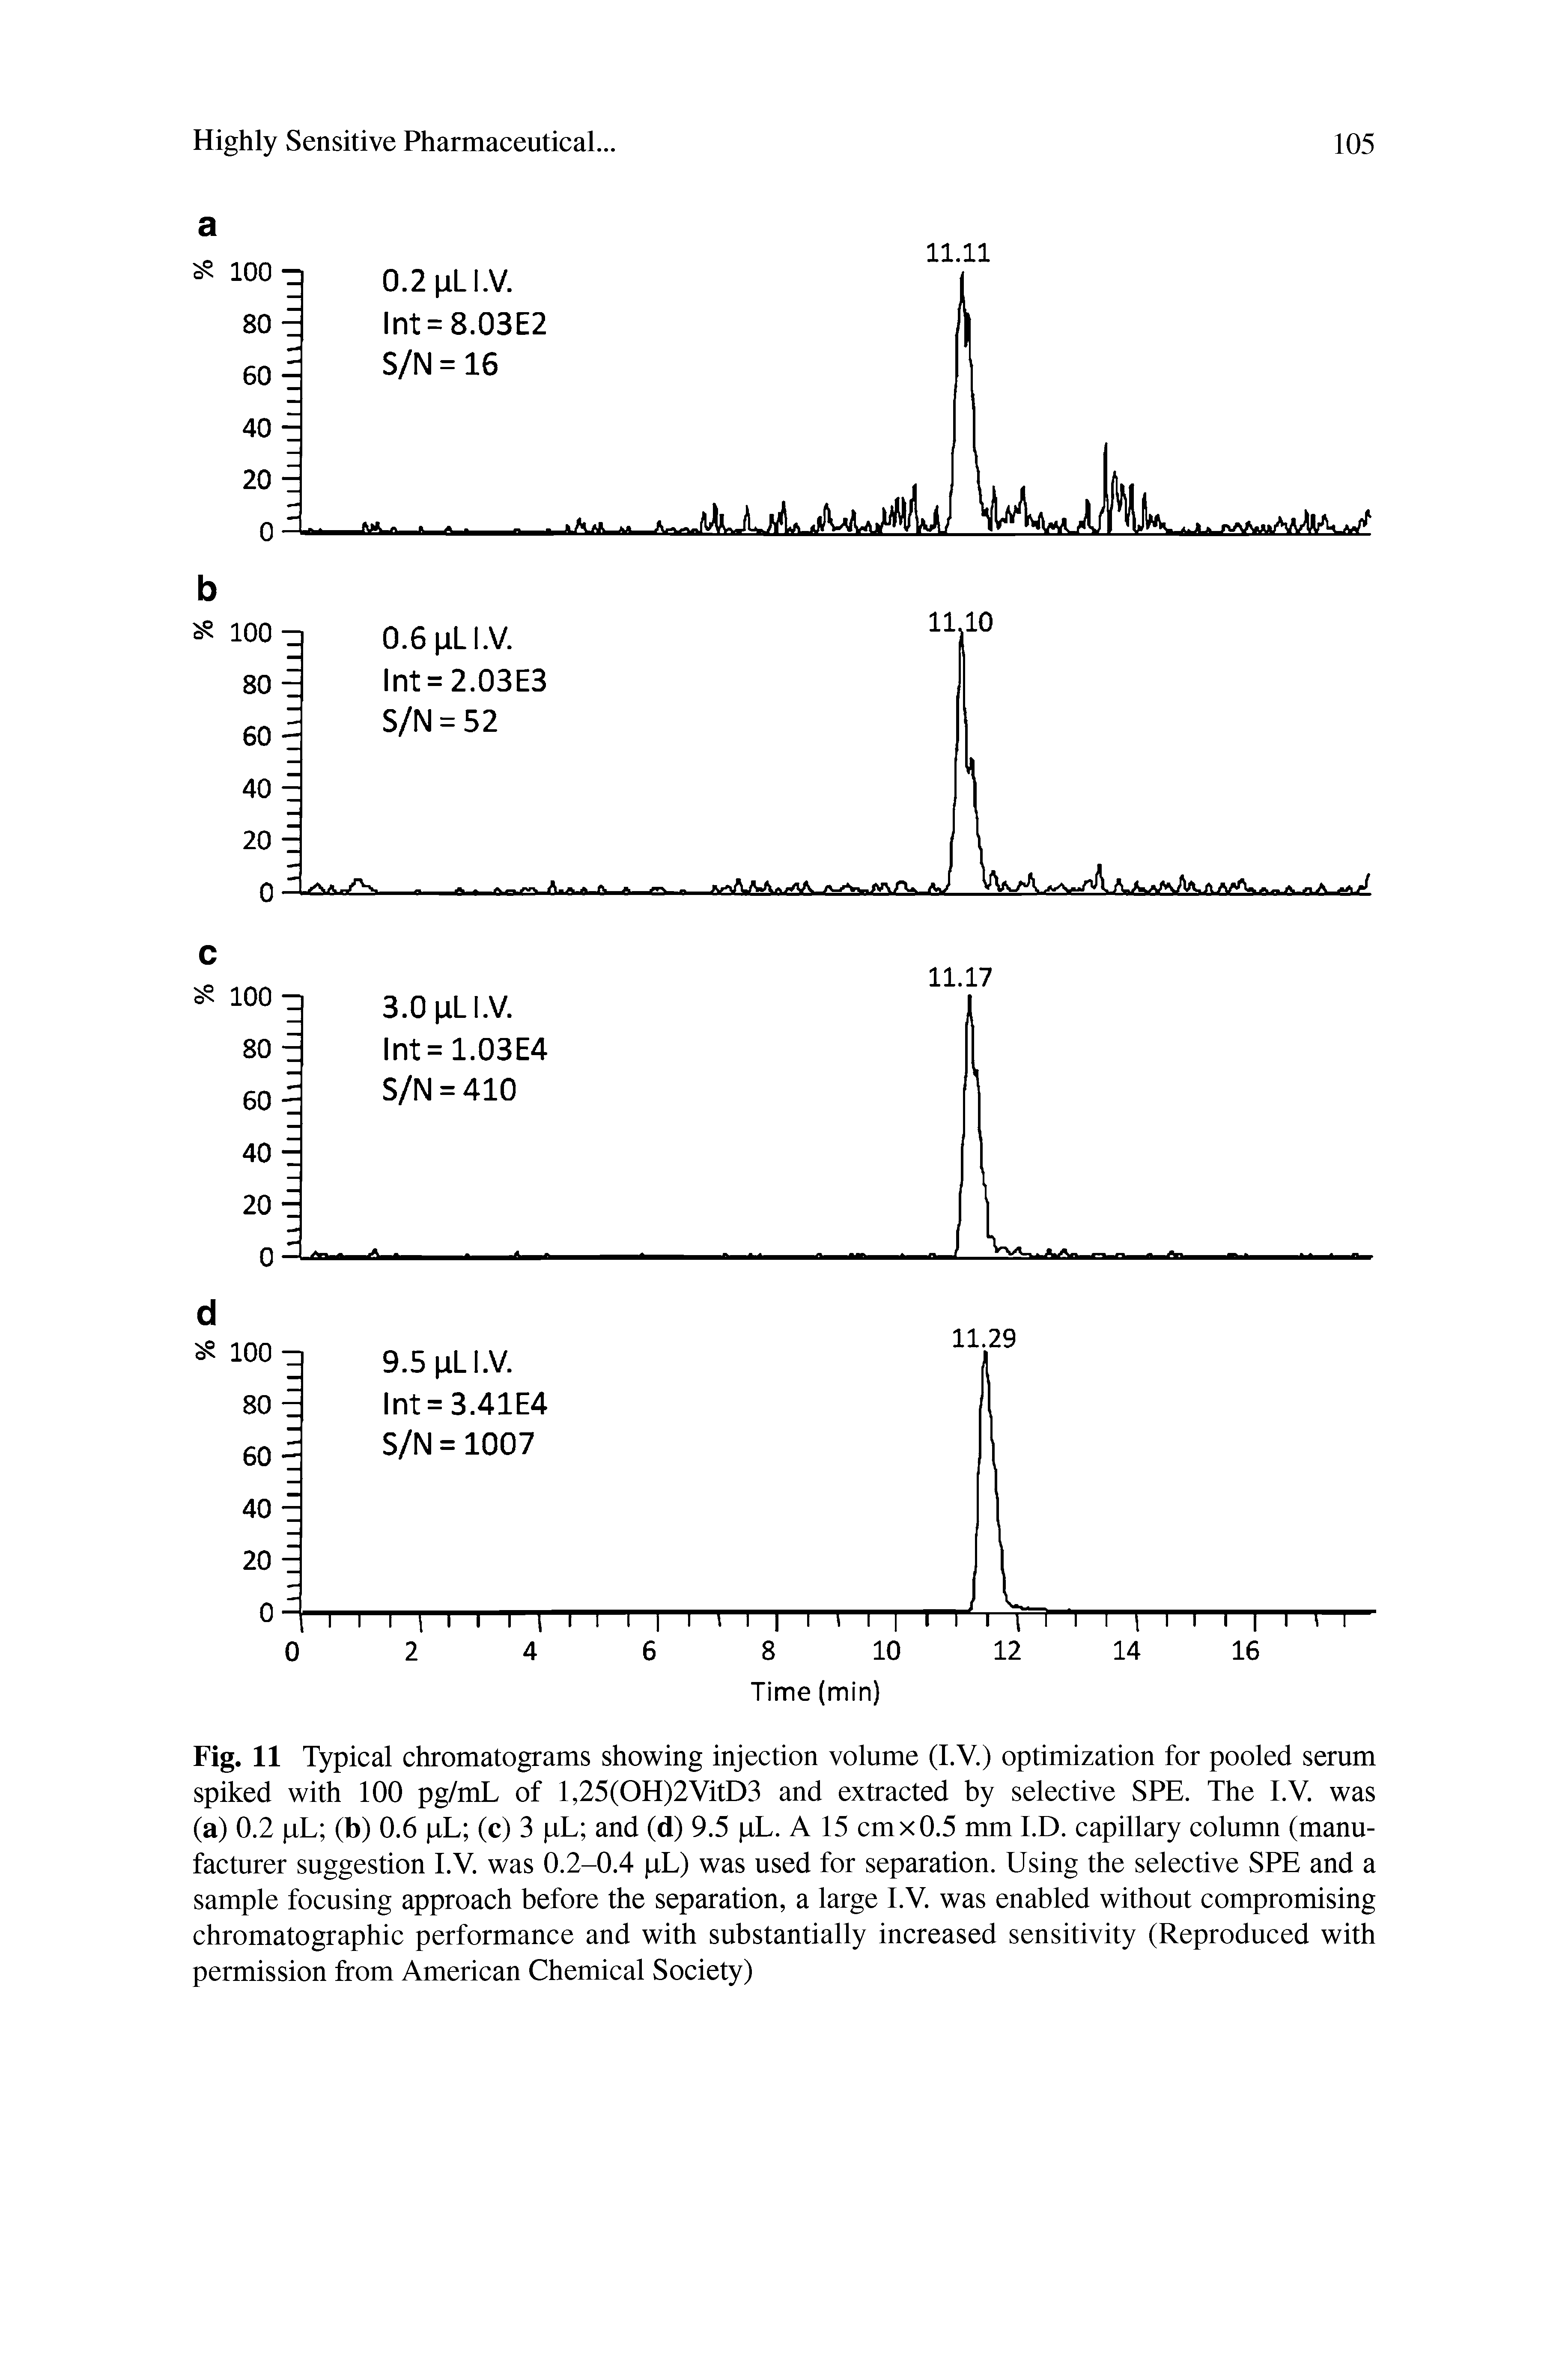 Fig. 11 Typical chromatograms showing injection volume (I.V.) optimization for pooled serum spiked with 100 pg/mL of l,25(OH)2VitD3 and extracted by selective SPE. The I.V. was (a) 0.2 pL (b) 0.6 pL (c) 3 pL and (d) 9.5 pL. A 15 cm x 0.5 mm I.D. capillary column (manufacturer suggestion I.V. was 0.2-0.4 pL) was used for separation. Using the selective SPE and a sample focusing approach before the separation, a large I.V. was enabled without compromising chromatographic performance and with substantially increased sensitivity (Reproduced with permission from American Chemical Society)...